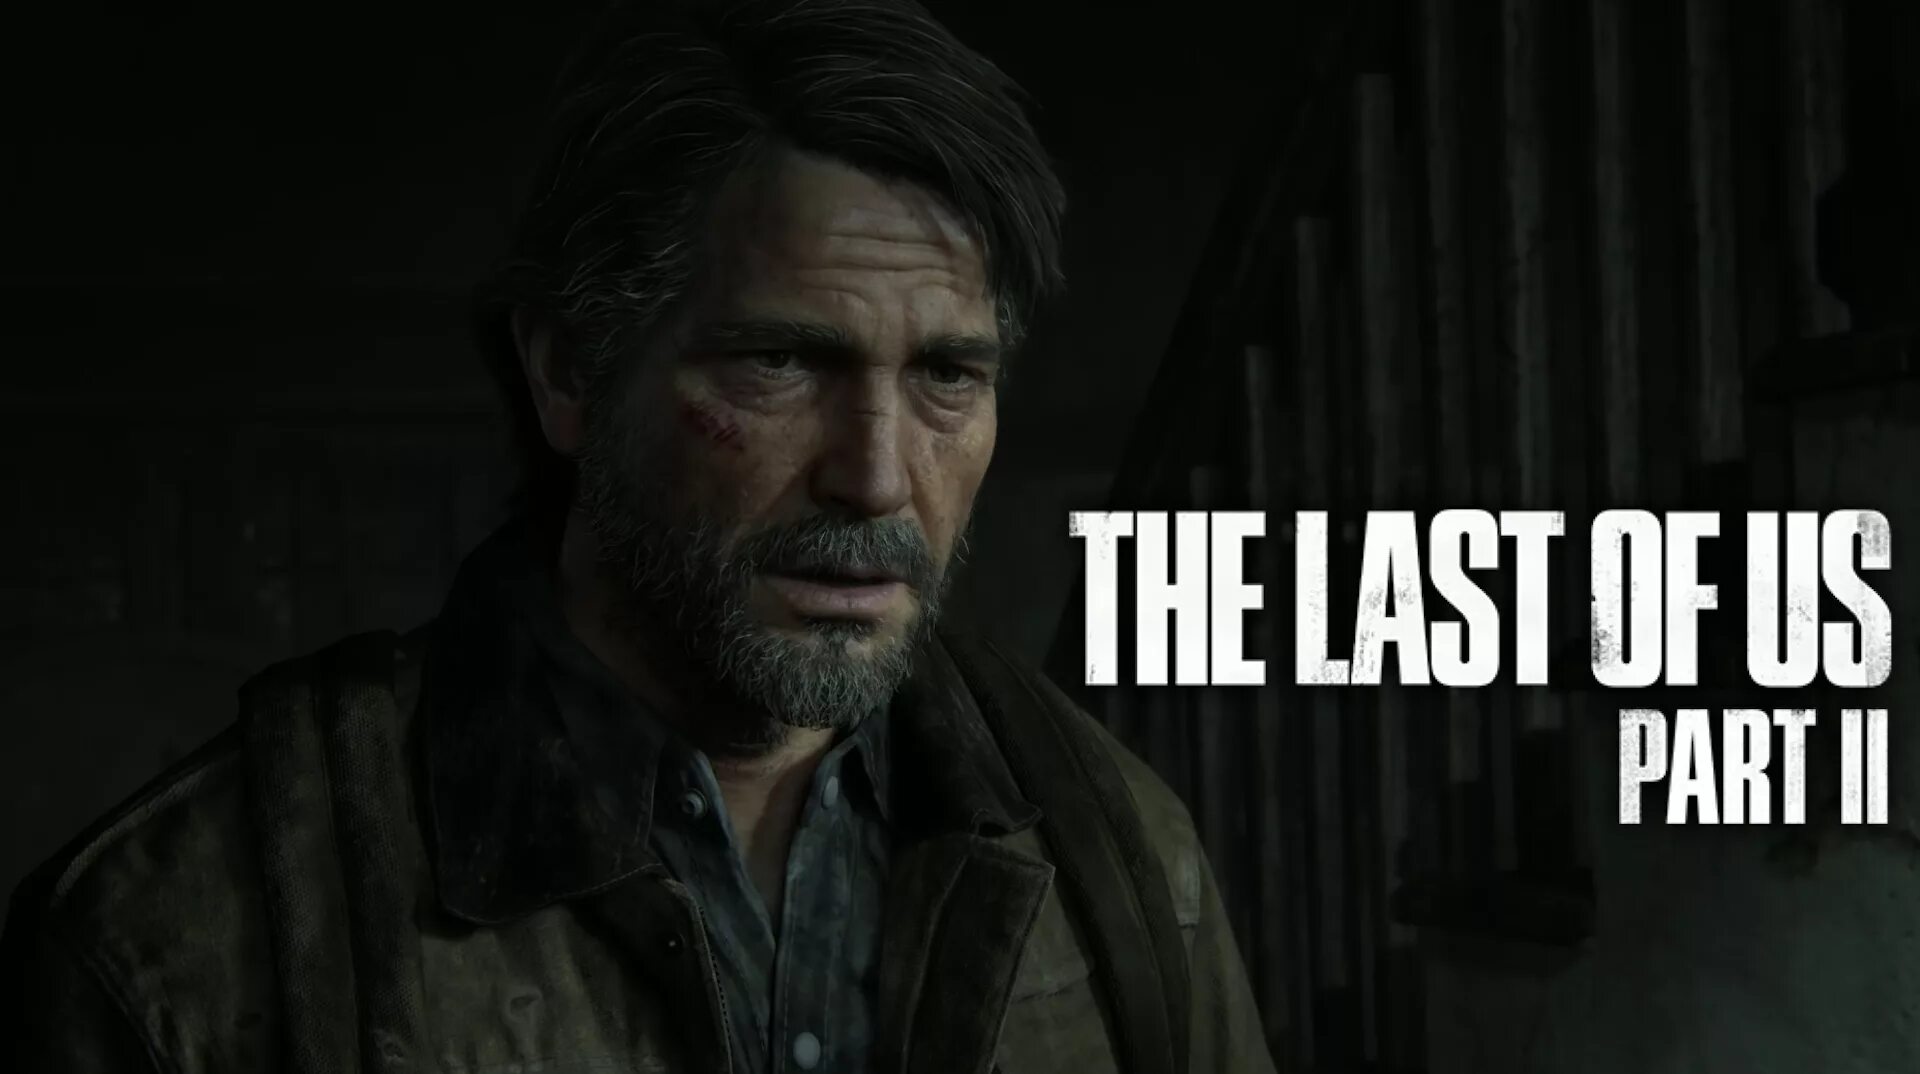 Код зе ласт оф ас. Джоэл the last of us 2. Джоэл the last of us. Джоэл из the last of us 2. Джоэл Миллер the last of us.